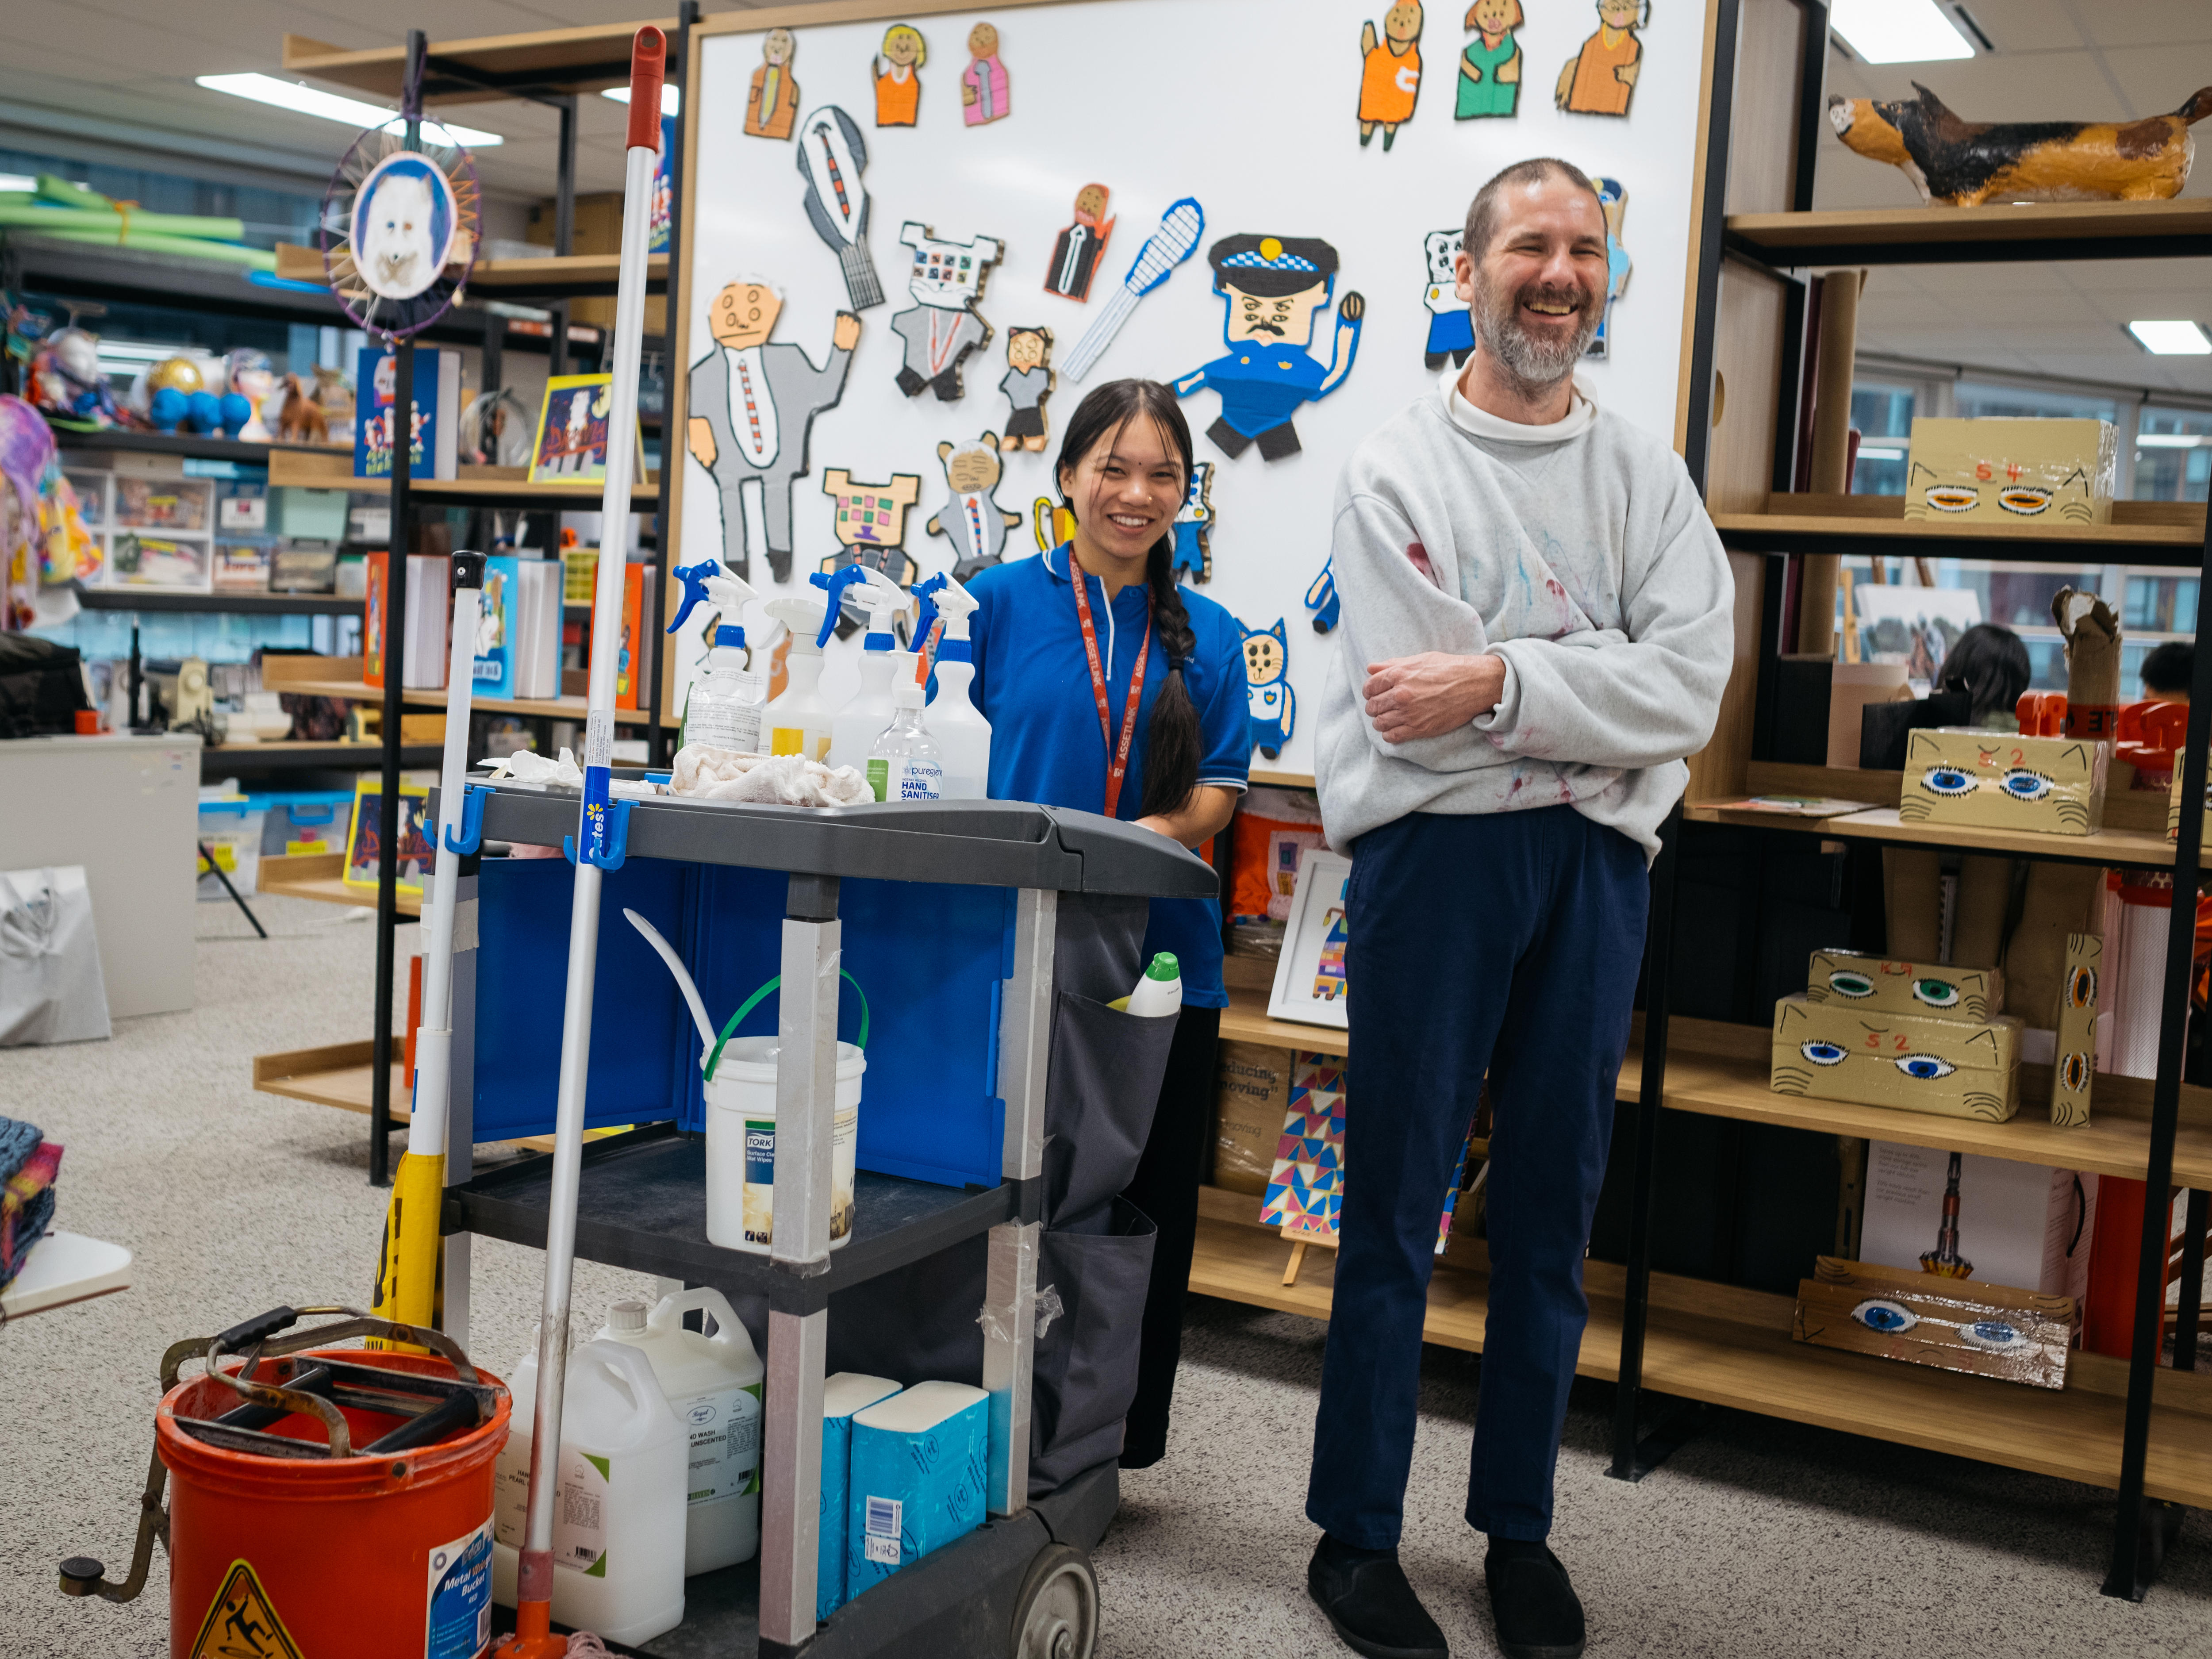 Cleaner Subita stands next to artist Thom in an art studio, they are both smiling. She is short with dark hair and a blue shirt